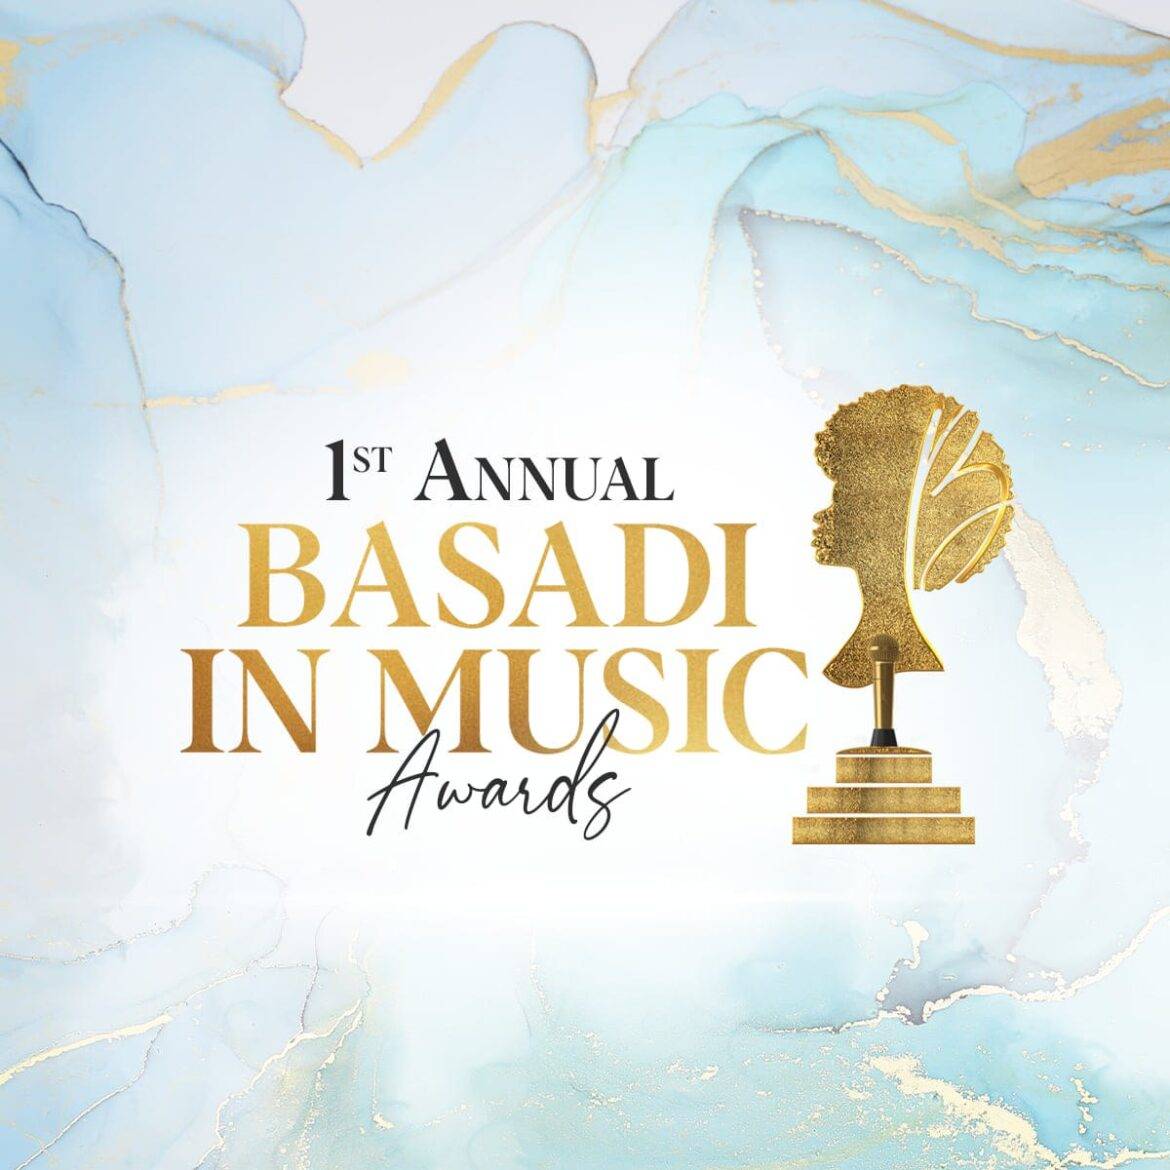 Basadi in Music Awards: official date, venue, and tickets